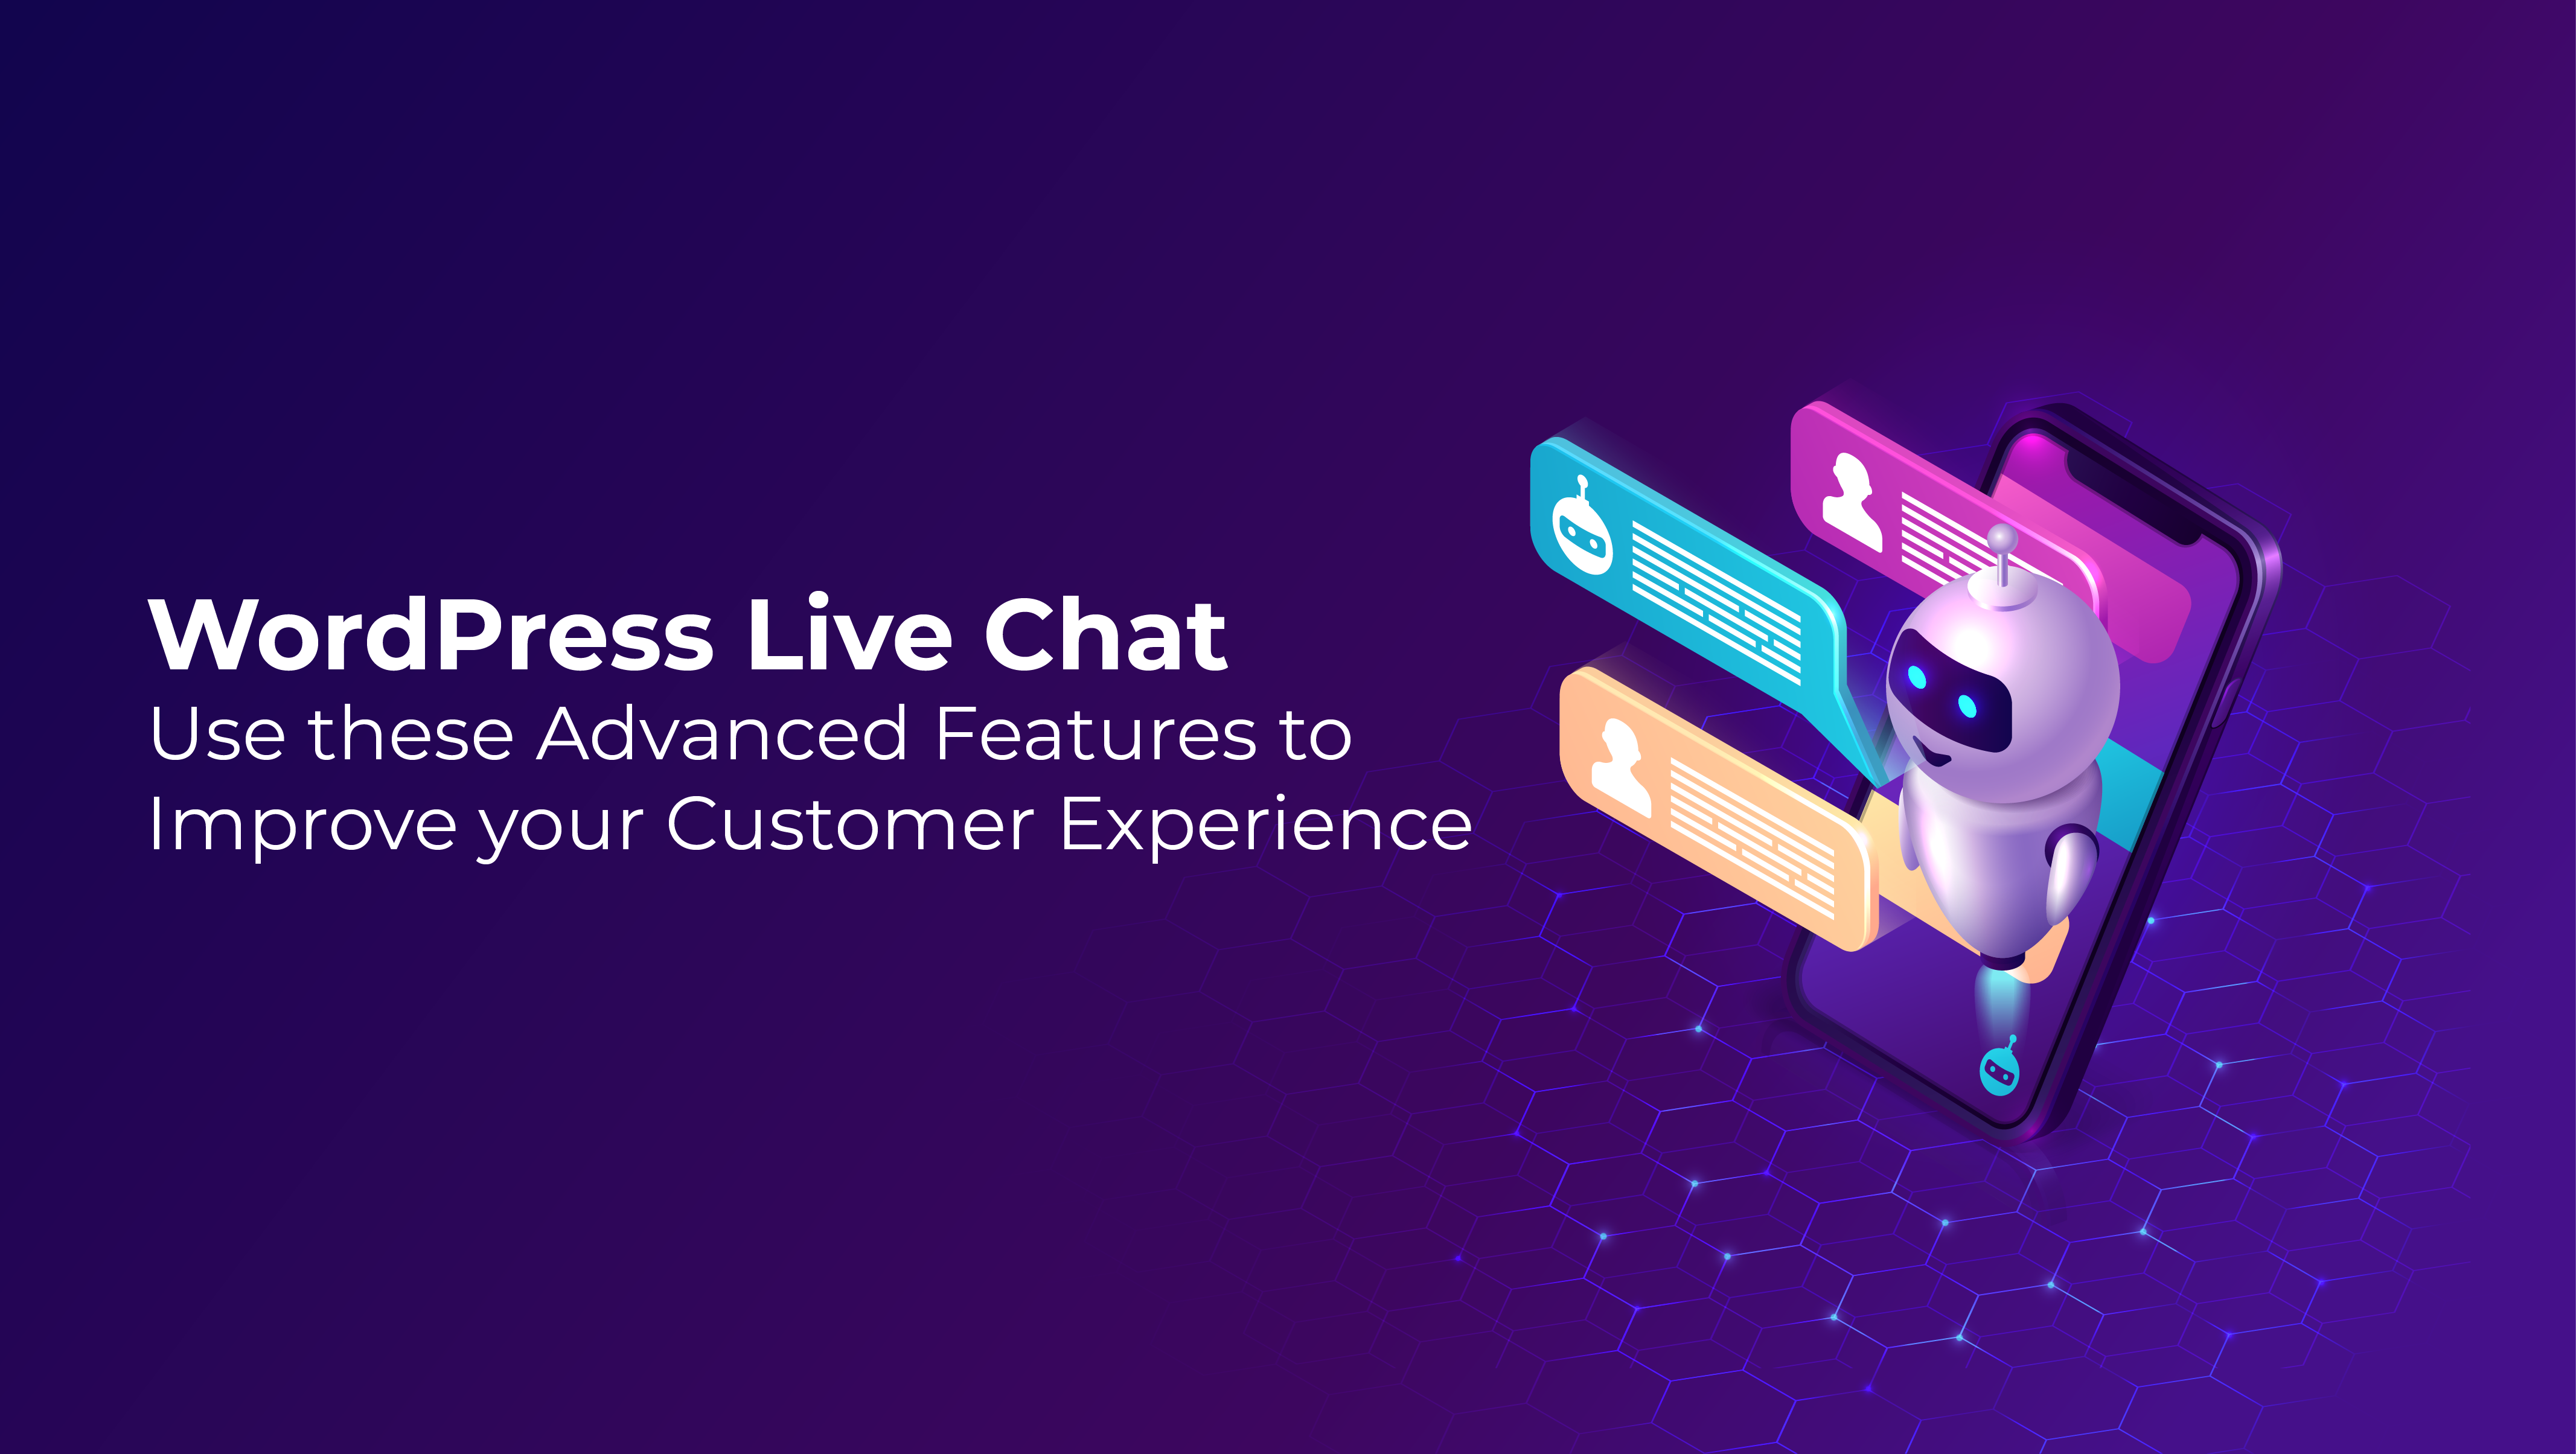 WordPress Live Chat - Use these Advanced Features to Improve your Customer Experience